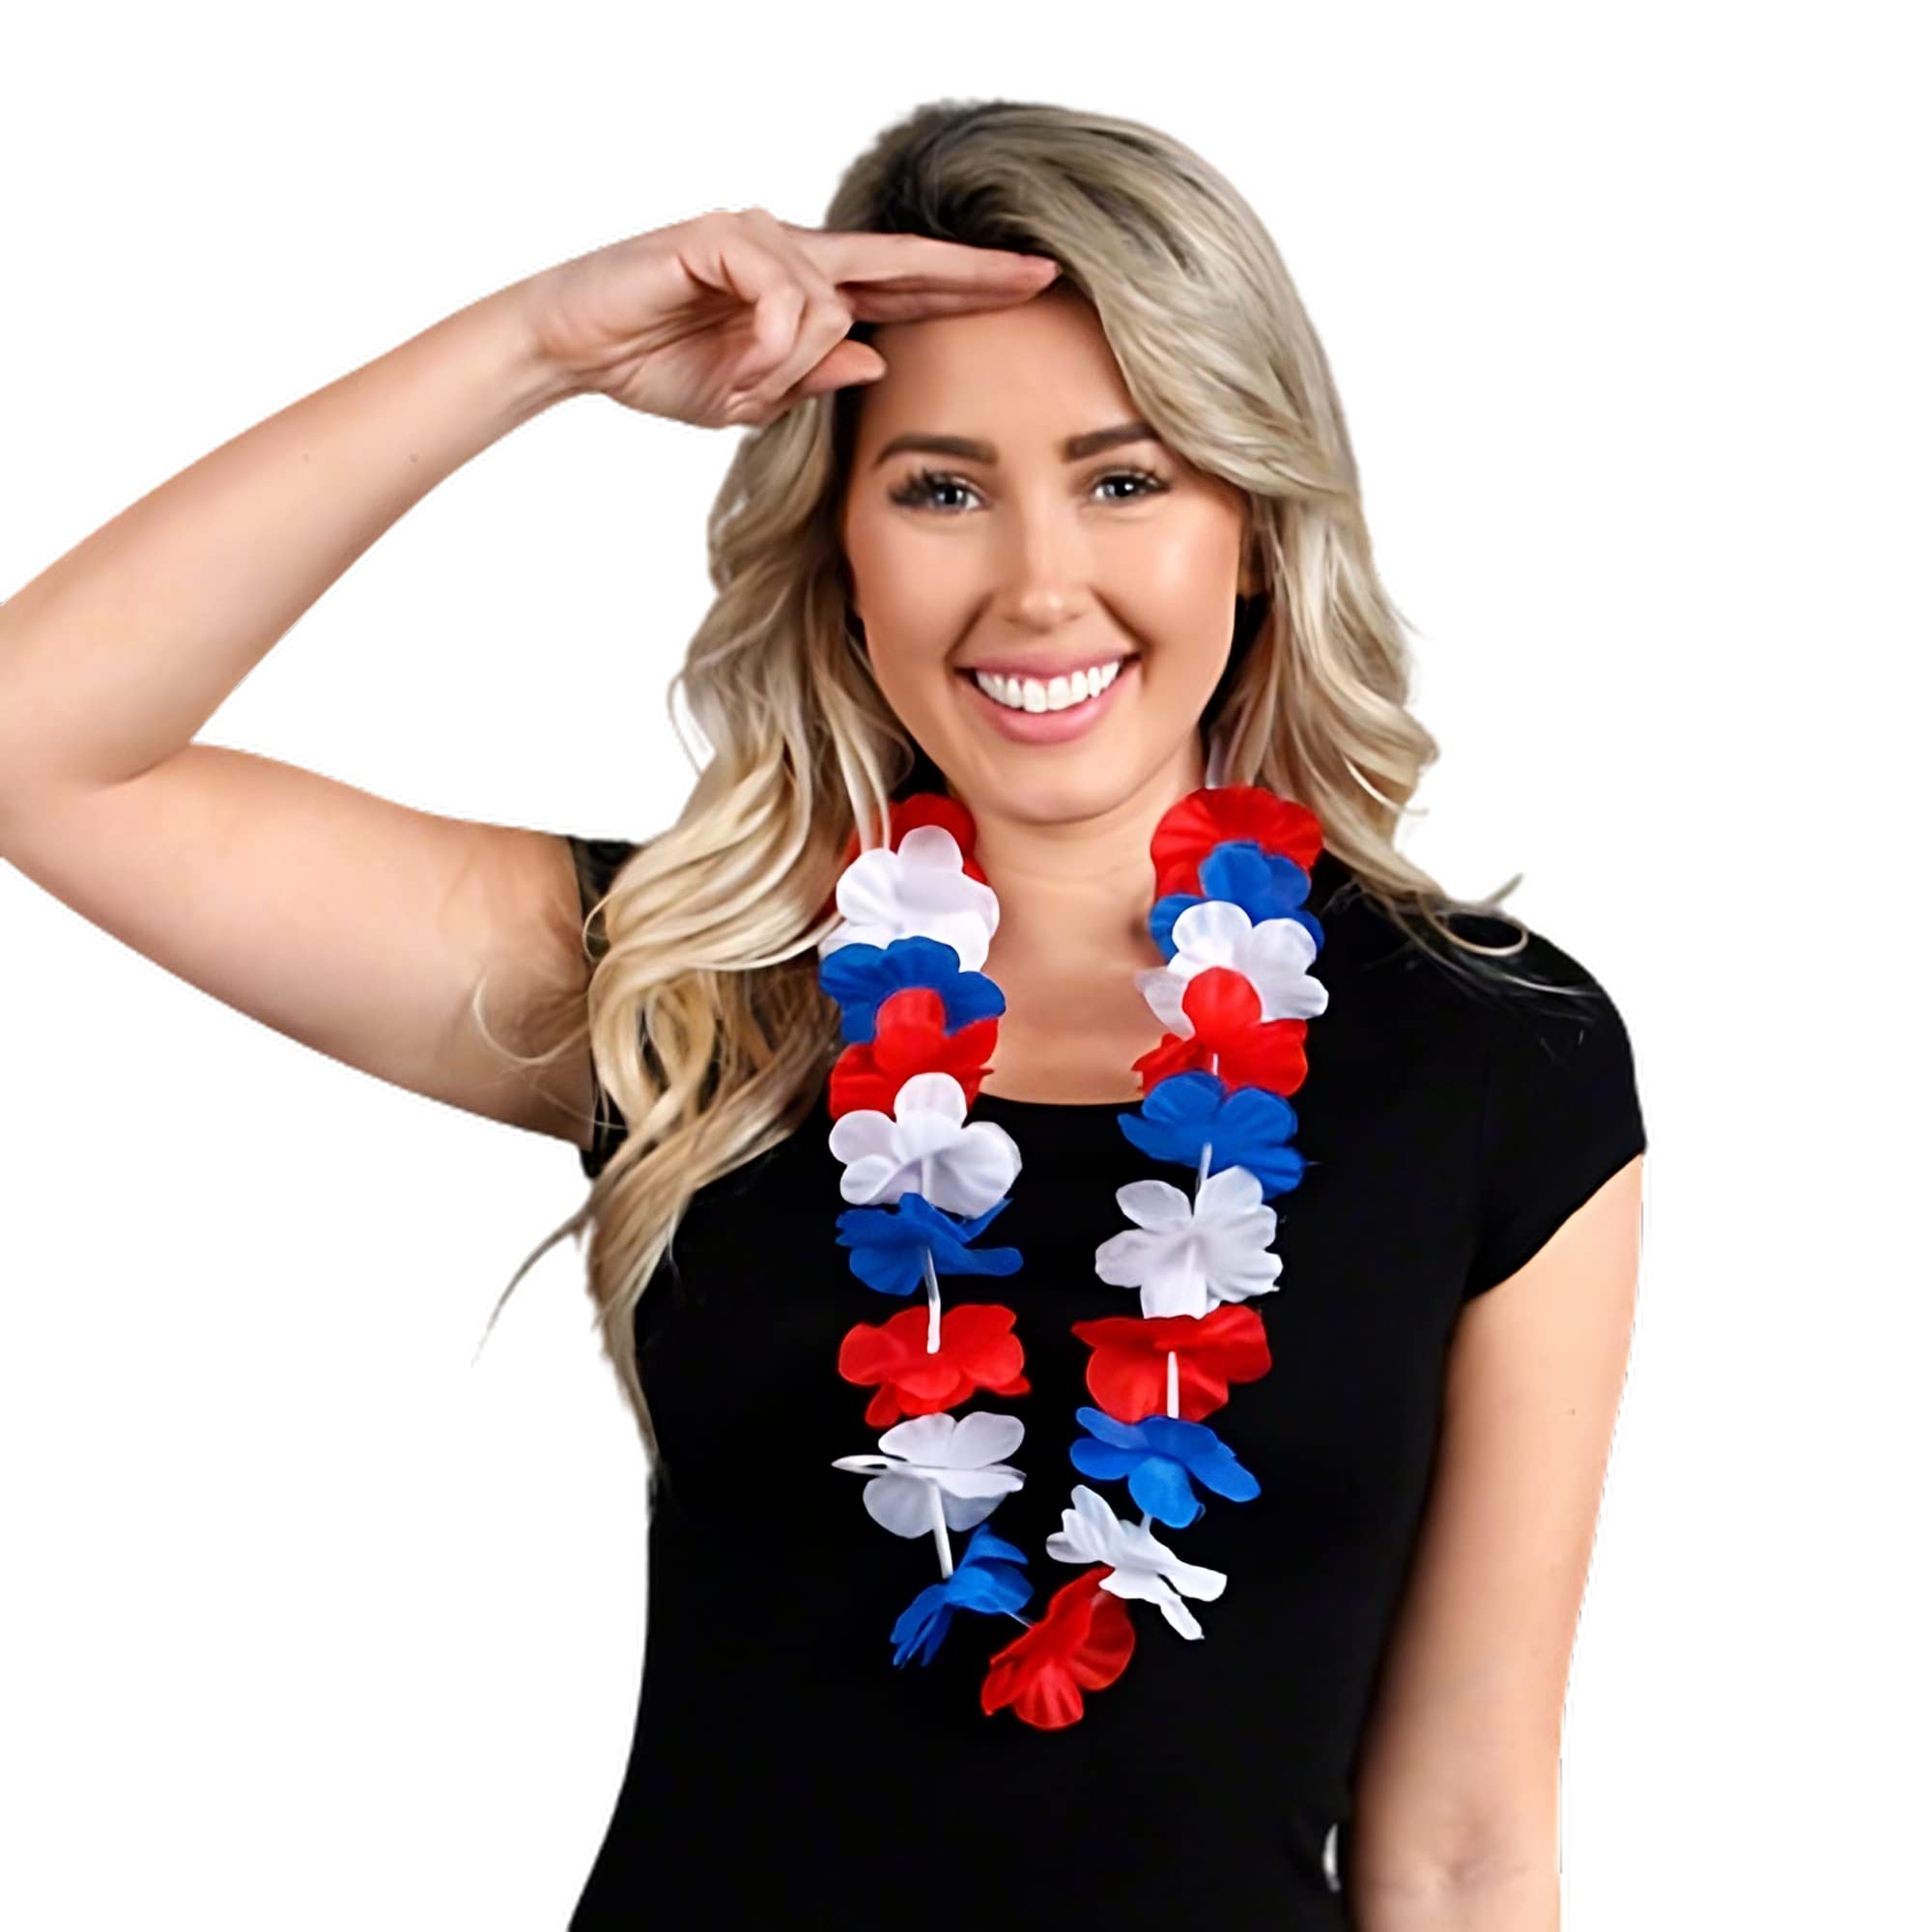 blinkee 3 Pack - Patriotic Pua Model - Hawaiian Lei Necklace - Red, White, Blue - Non-Light Up - Libertyville Luau Edition - Perfect for Independence Day, Parades, BBQs, and Festivals